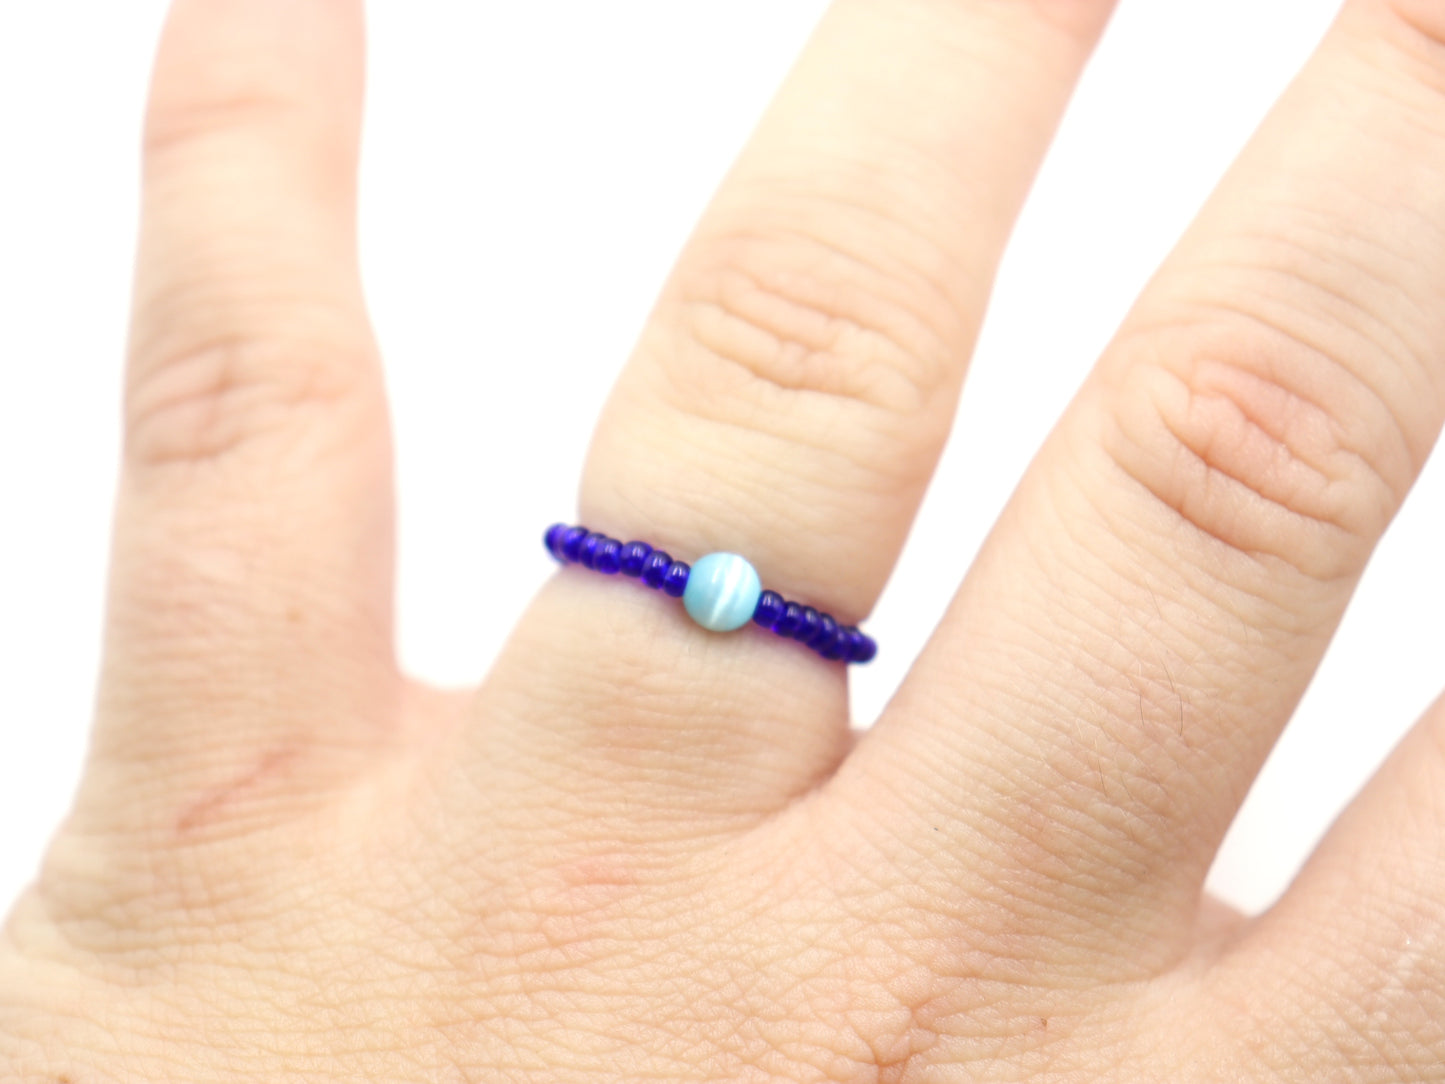 Cat's Eye On the Price - Synthetic Cat's Eye and Blue Glass Bead Stretch Ring by Monkey's Mojo